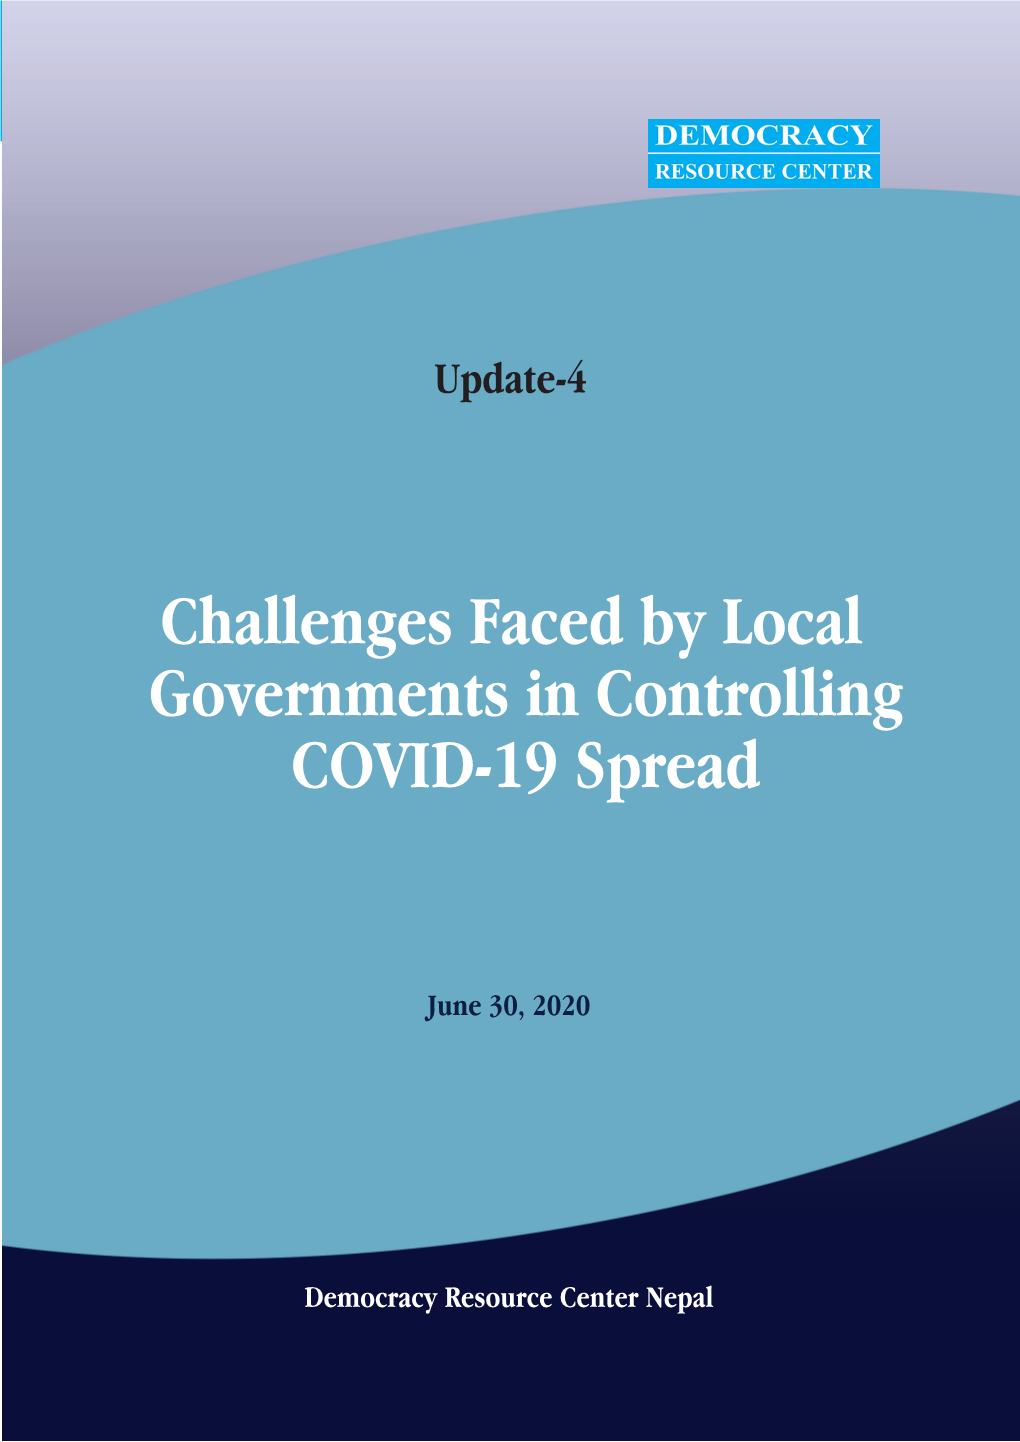 Challenges Faced by Local Governments in Controlling COVID-19 Spread